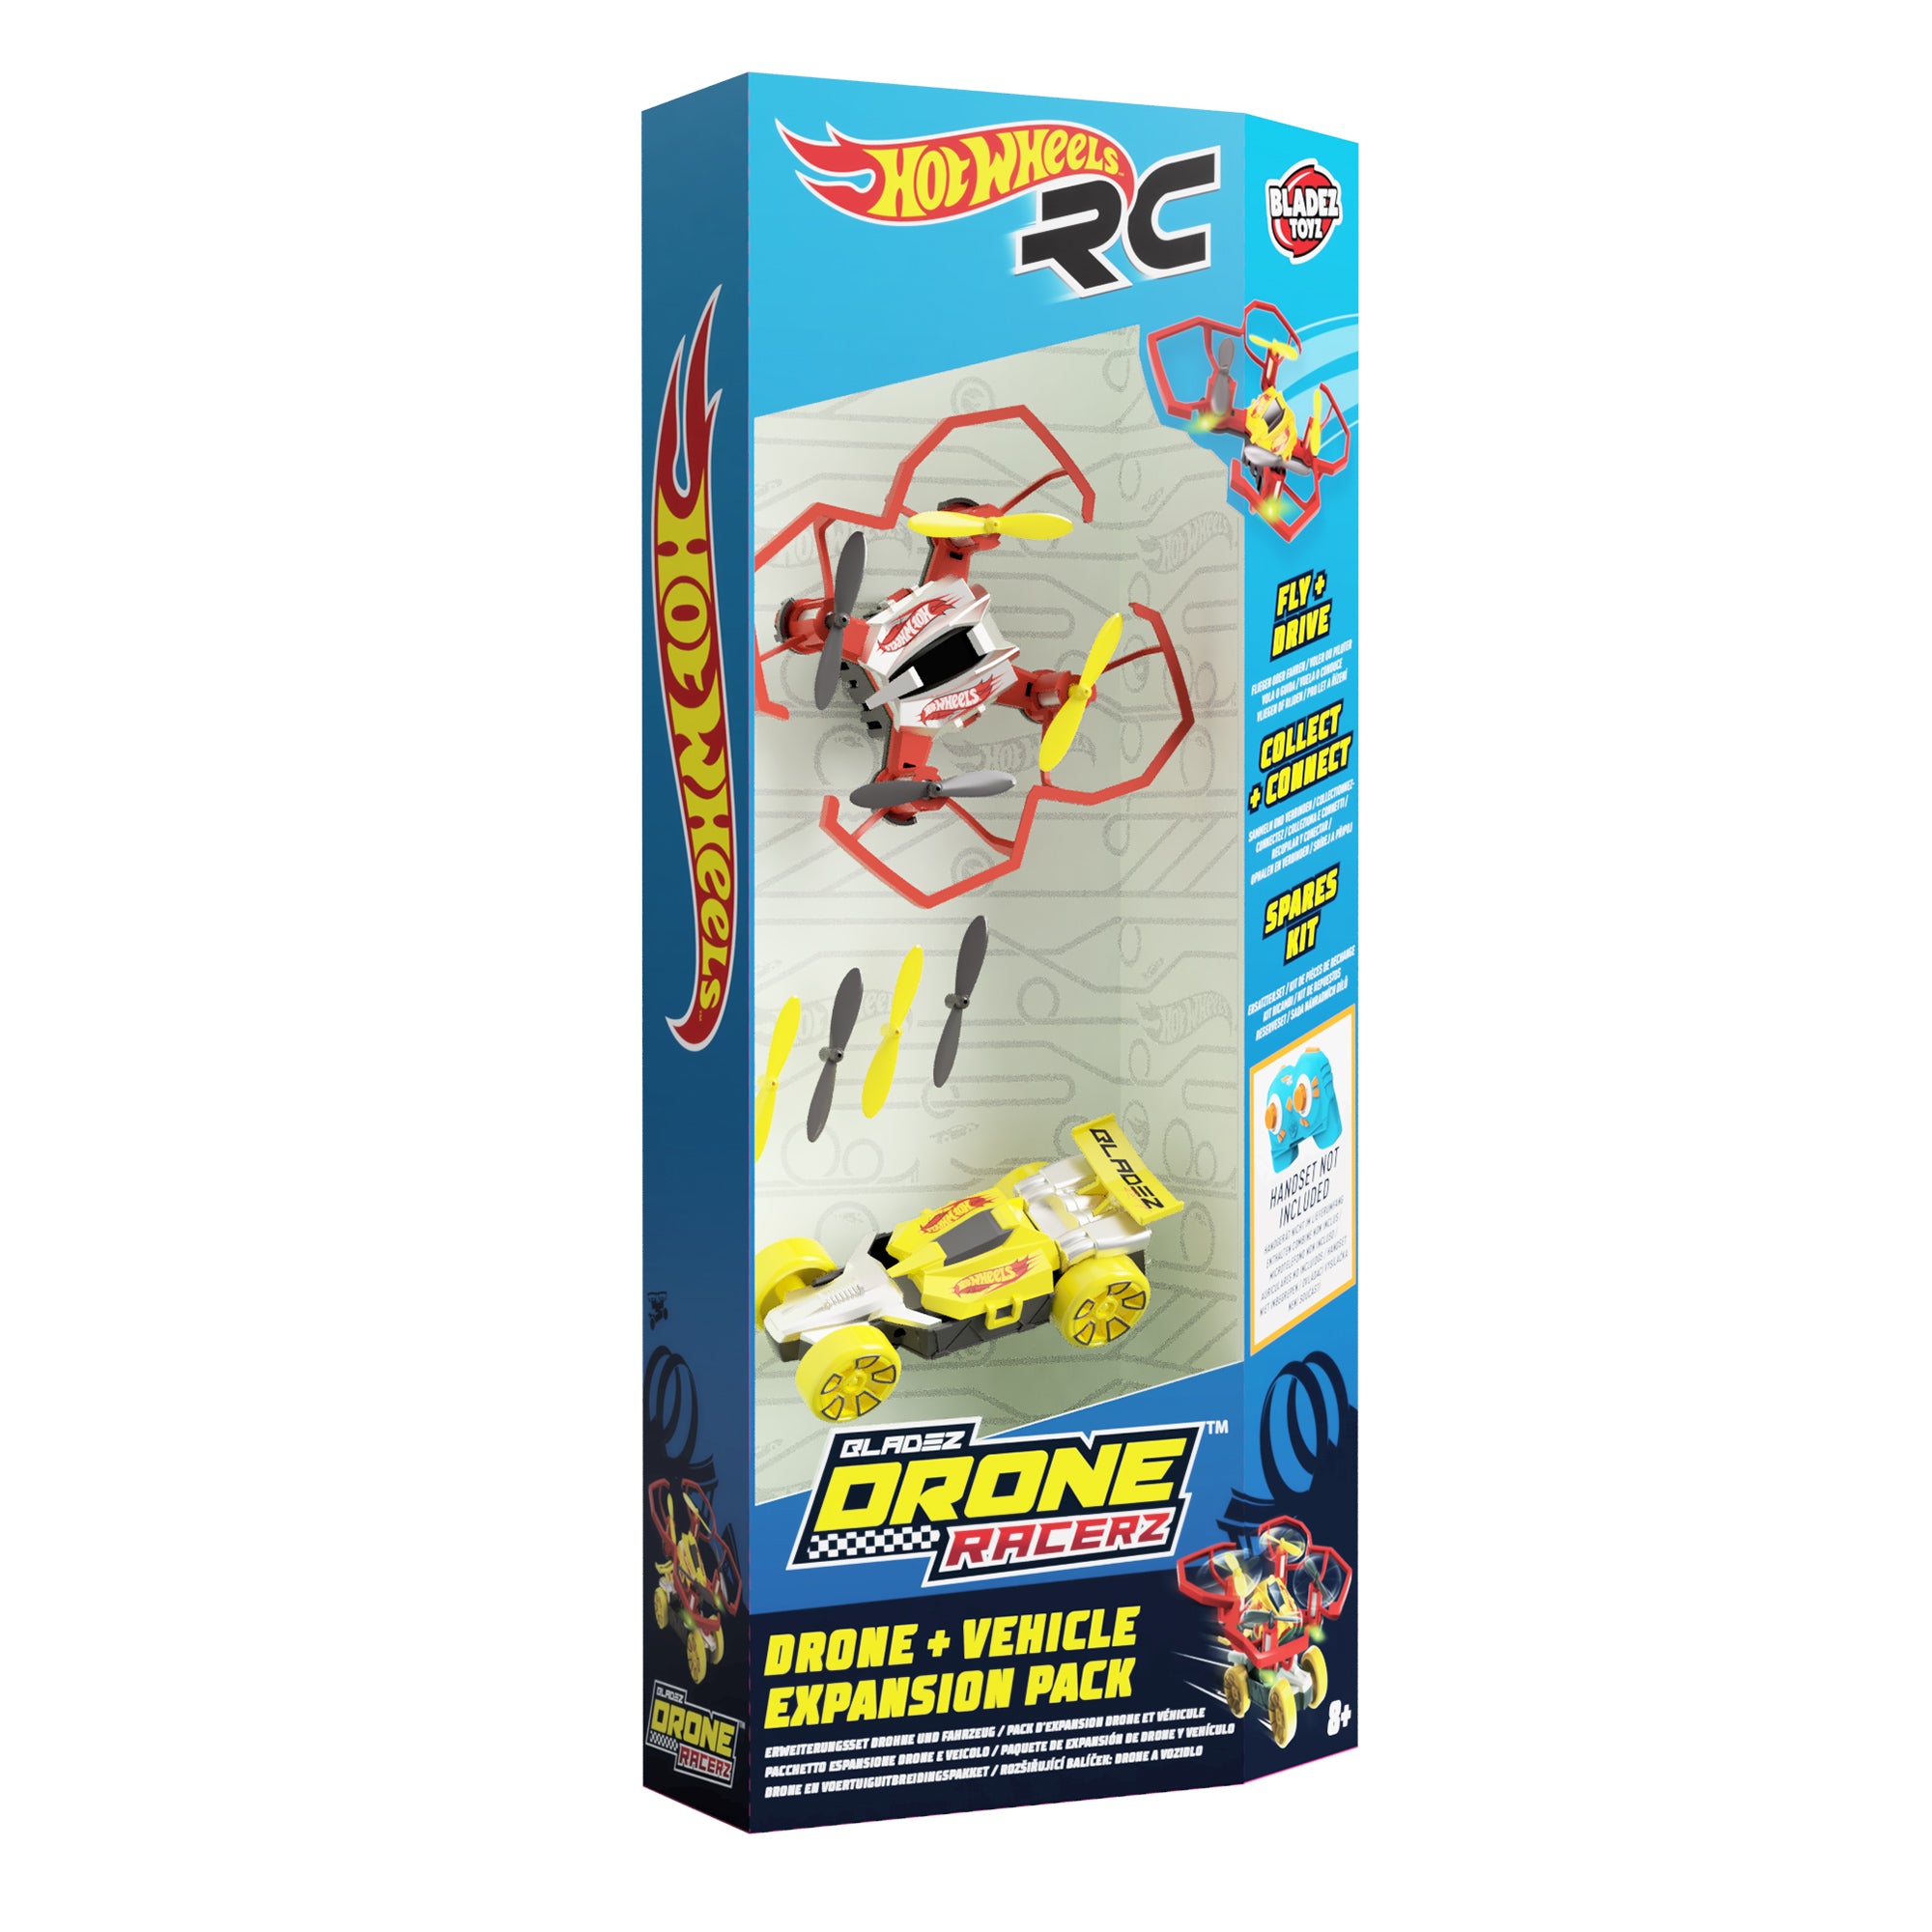 hot wheels rc helicopter